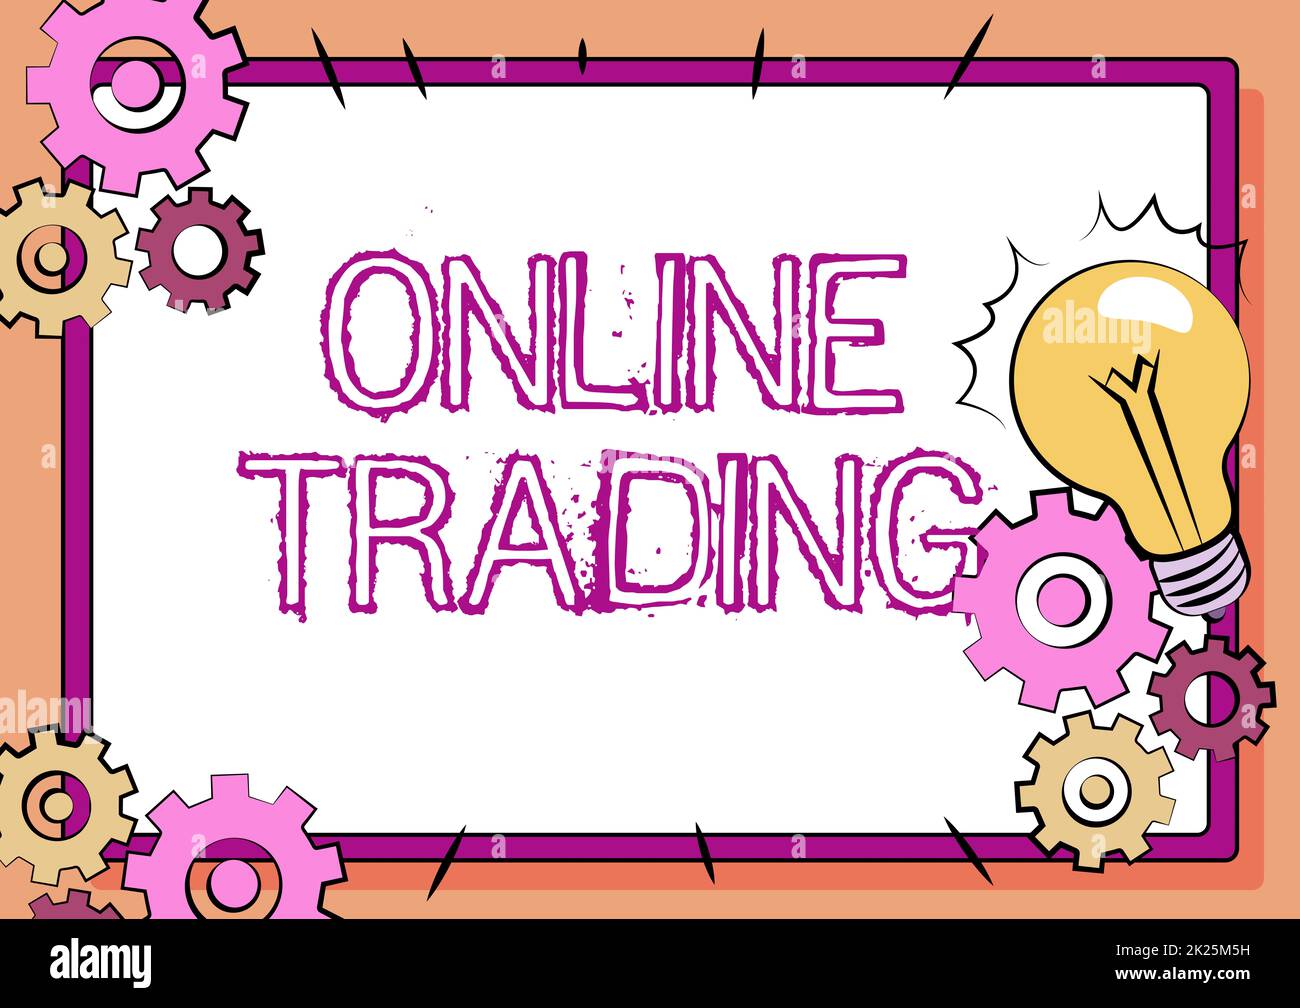 Text sign showing Online Trading. Concept meaning Buying and selling assets via a brokerage internet platform Fixing Old Filing System, Maintaining Online Files, Removing Broken Keys Stock Photo